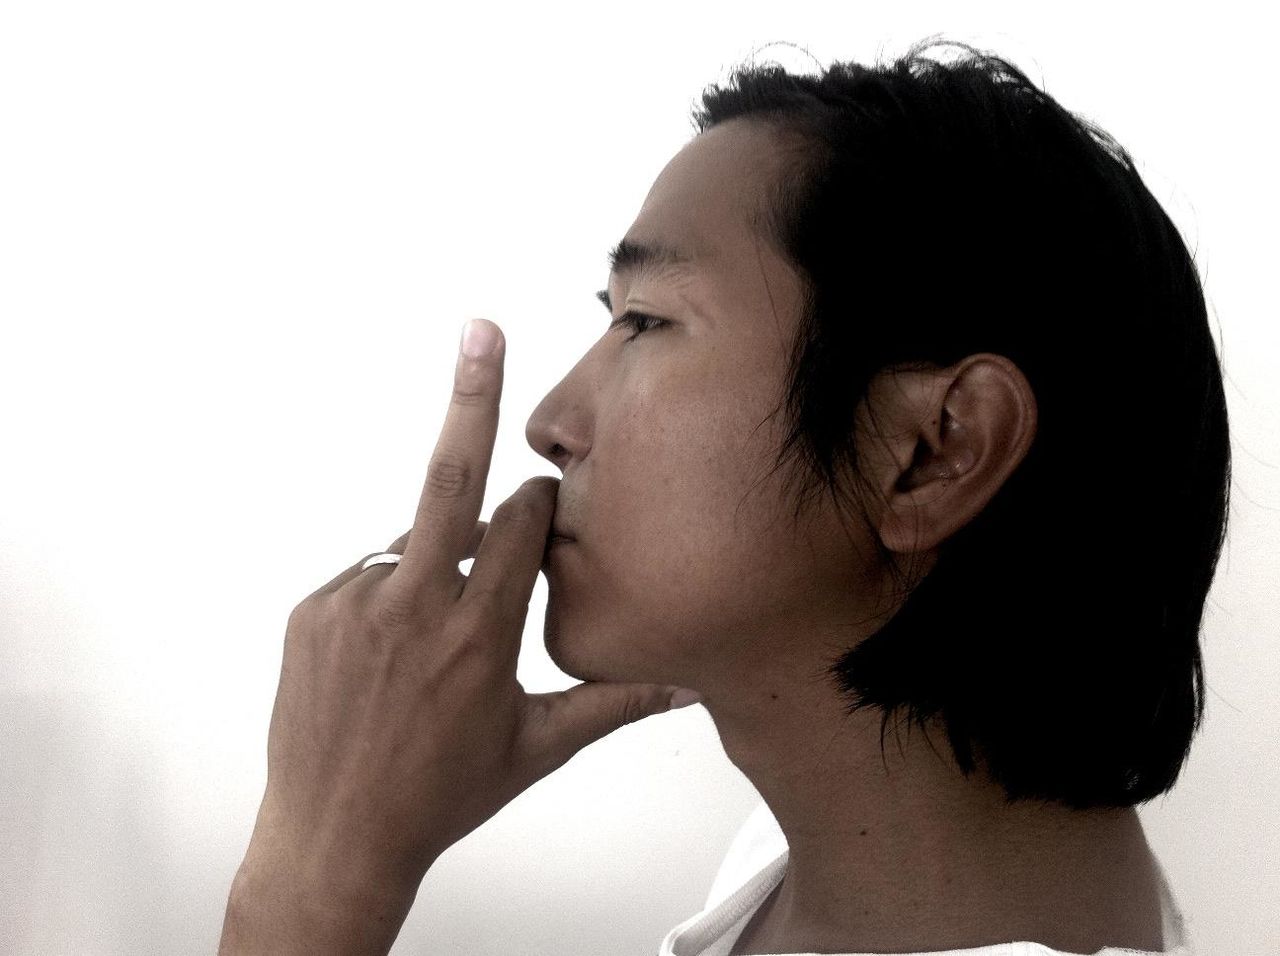 Profile view of young man showing middle finger against white background